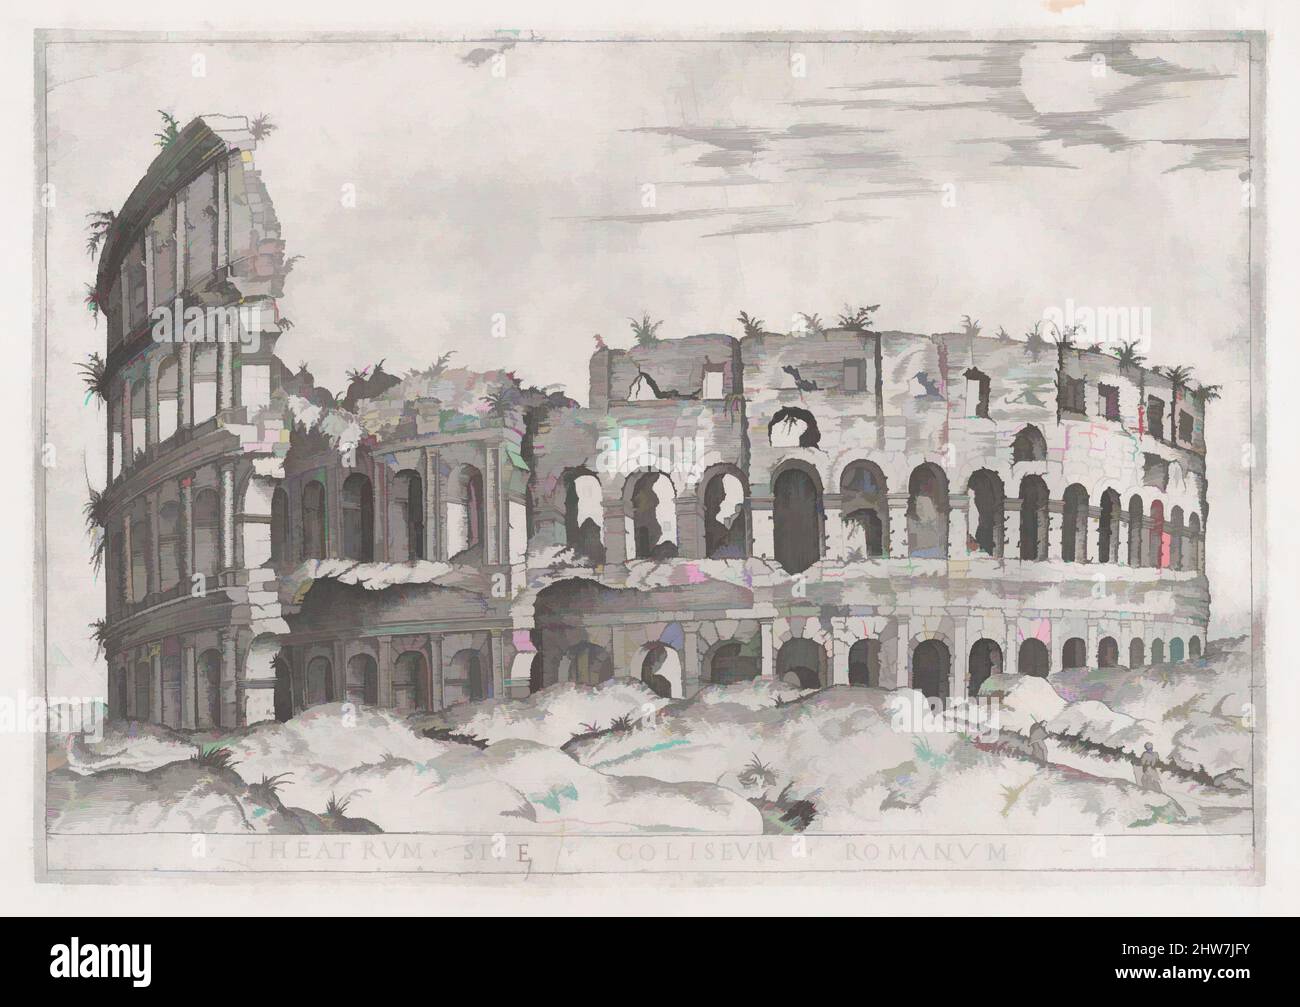 Art inspired by Speculum Romanae Magnificentiae: The Coloseum, 16th century, Engraving, sheet: 13 5/8 x 19 3/16 in. (34.6 x 48.8 cm), Prints, Anonymous, Classic works modernized by Artotop with a splash of modernity. Shapes, color and value, eye-catching visual impact on art. Emotions through freedom of artworks in a contemporary way. A timeless message pursuing a wildly creative new direction. Artists turning to the digital medium and creating the Artotop NFT Stock Photo